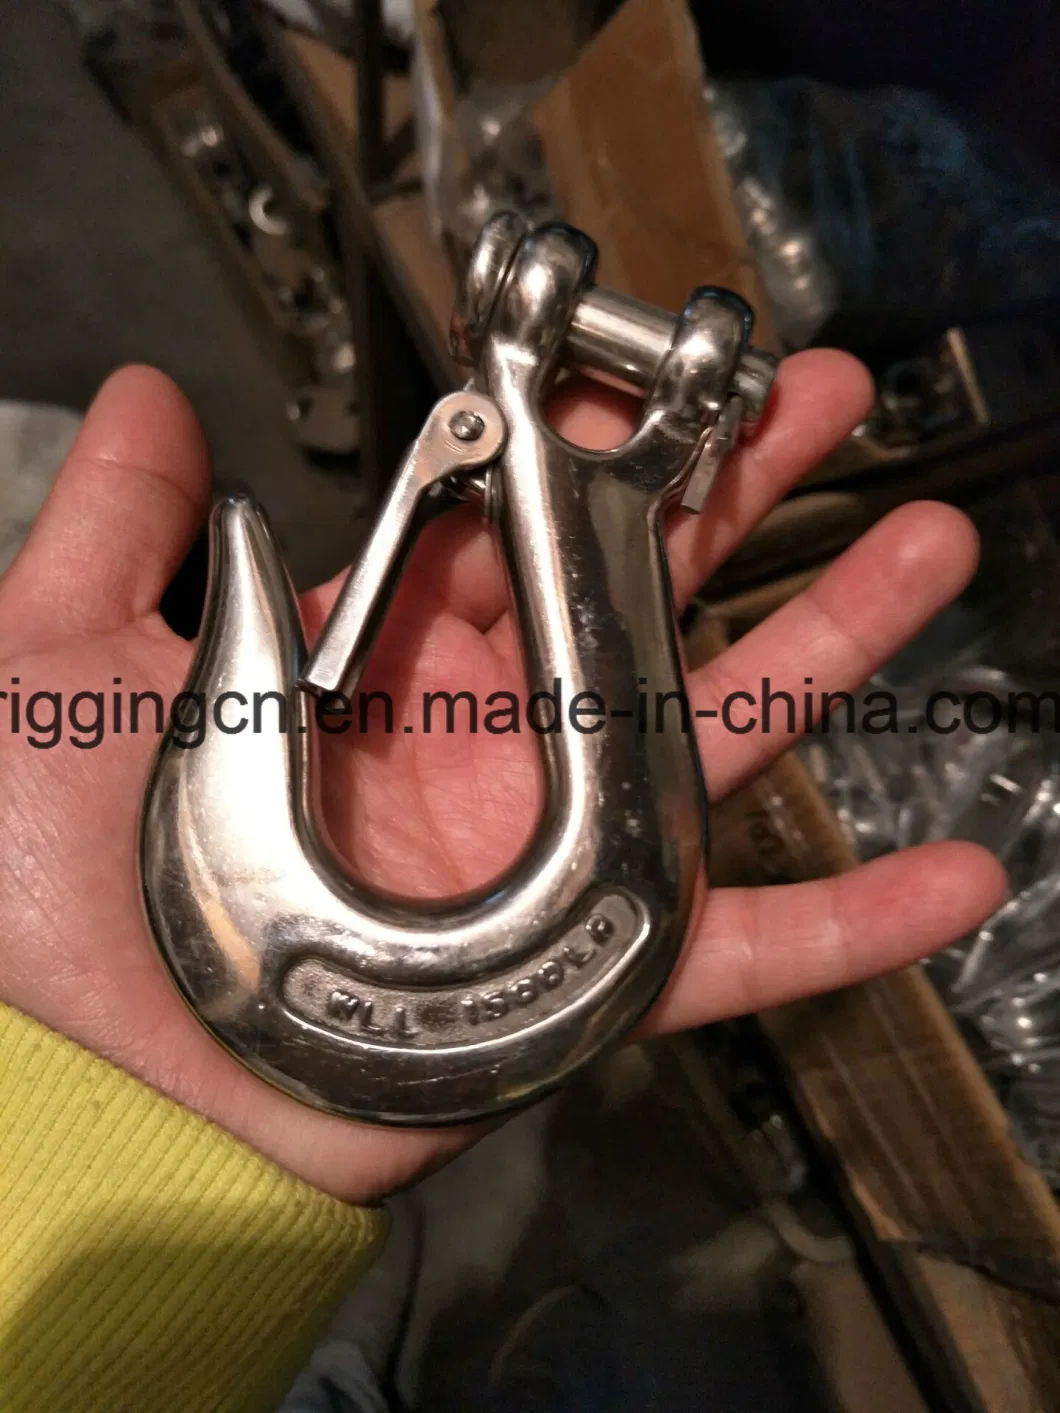 Ss 316 Clevis Hook with Latch 3/8 Inch Wll 2 Ton